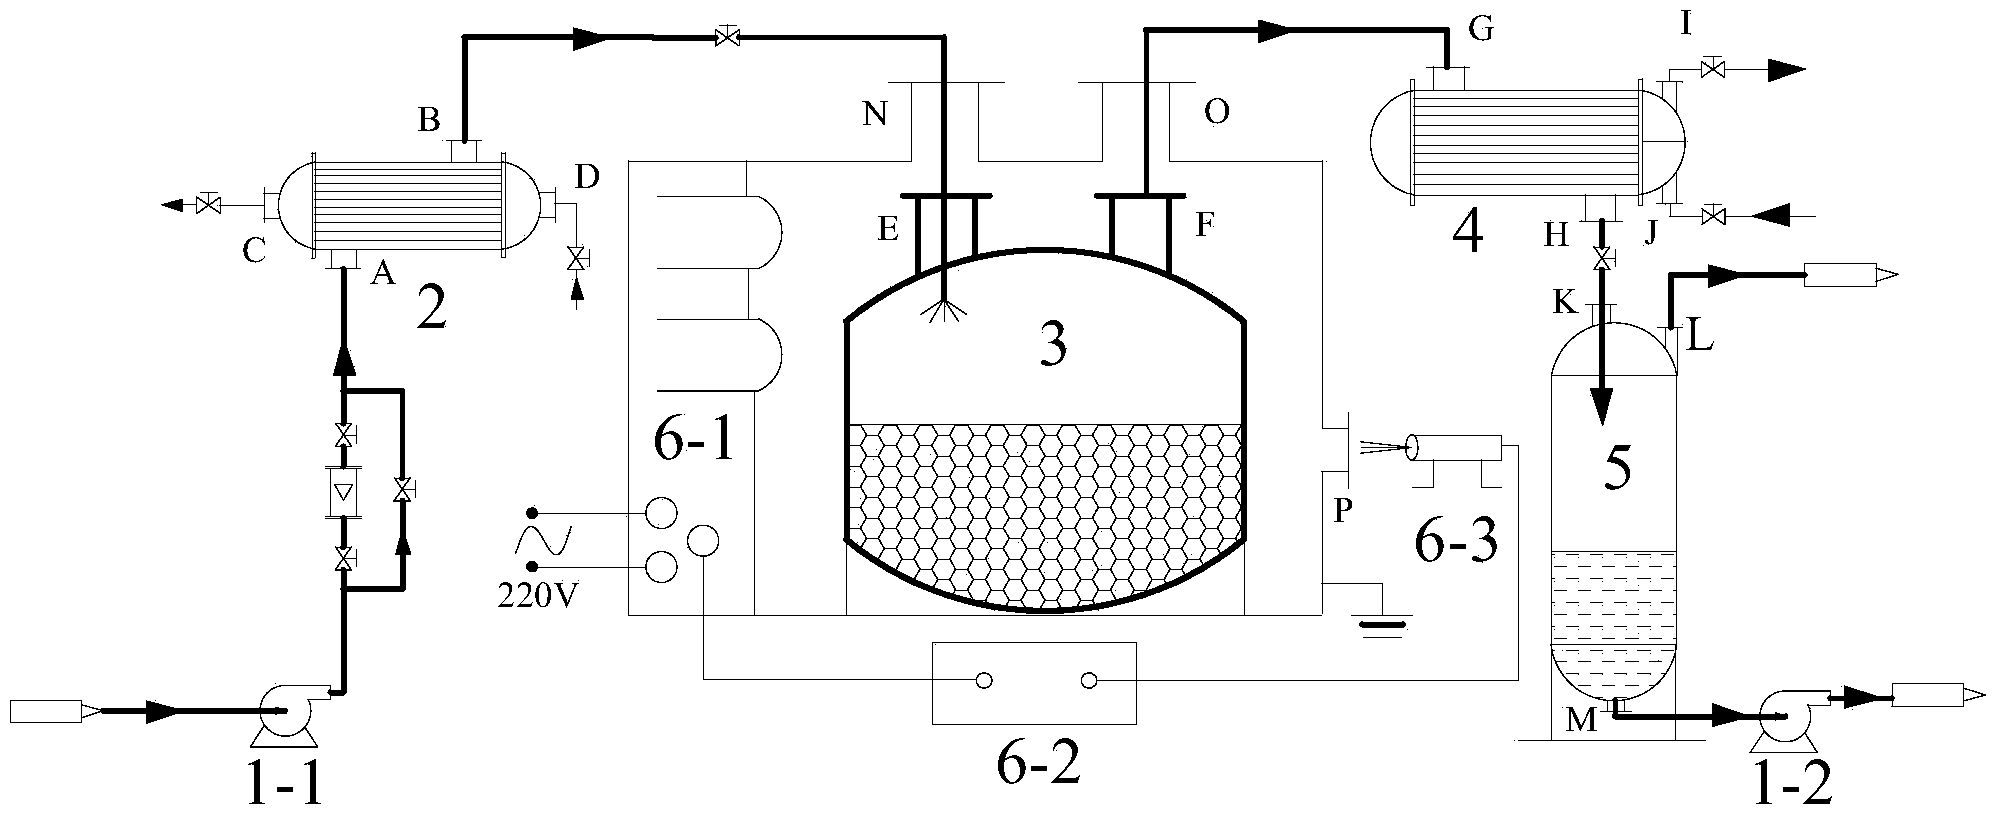 Device and technique for preparing methyl undecylenate by cracking methyl ricinoleate